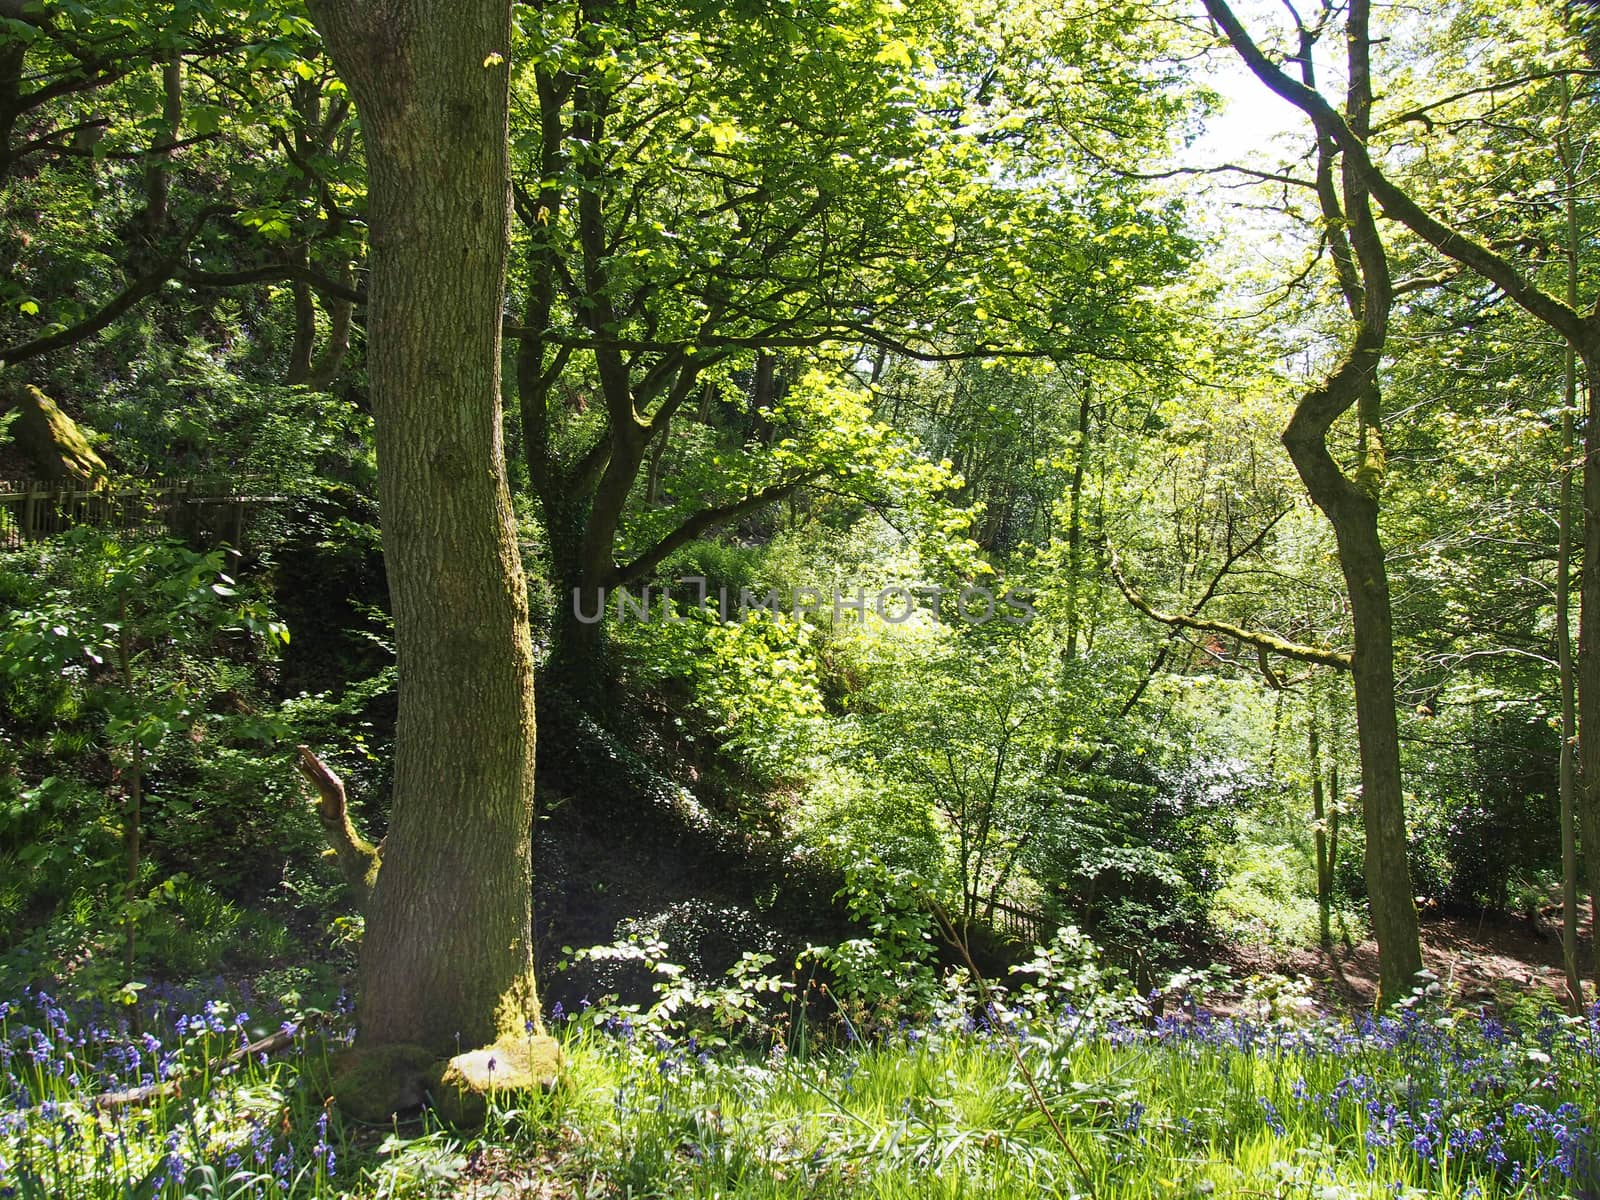 a sunlit woodland scene with light shining on the leaves and trees with the ground carpeted by springtime bluebells